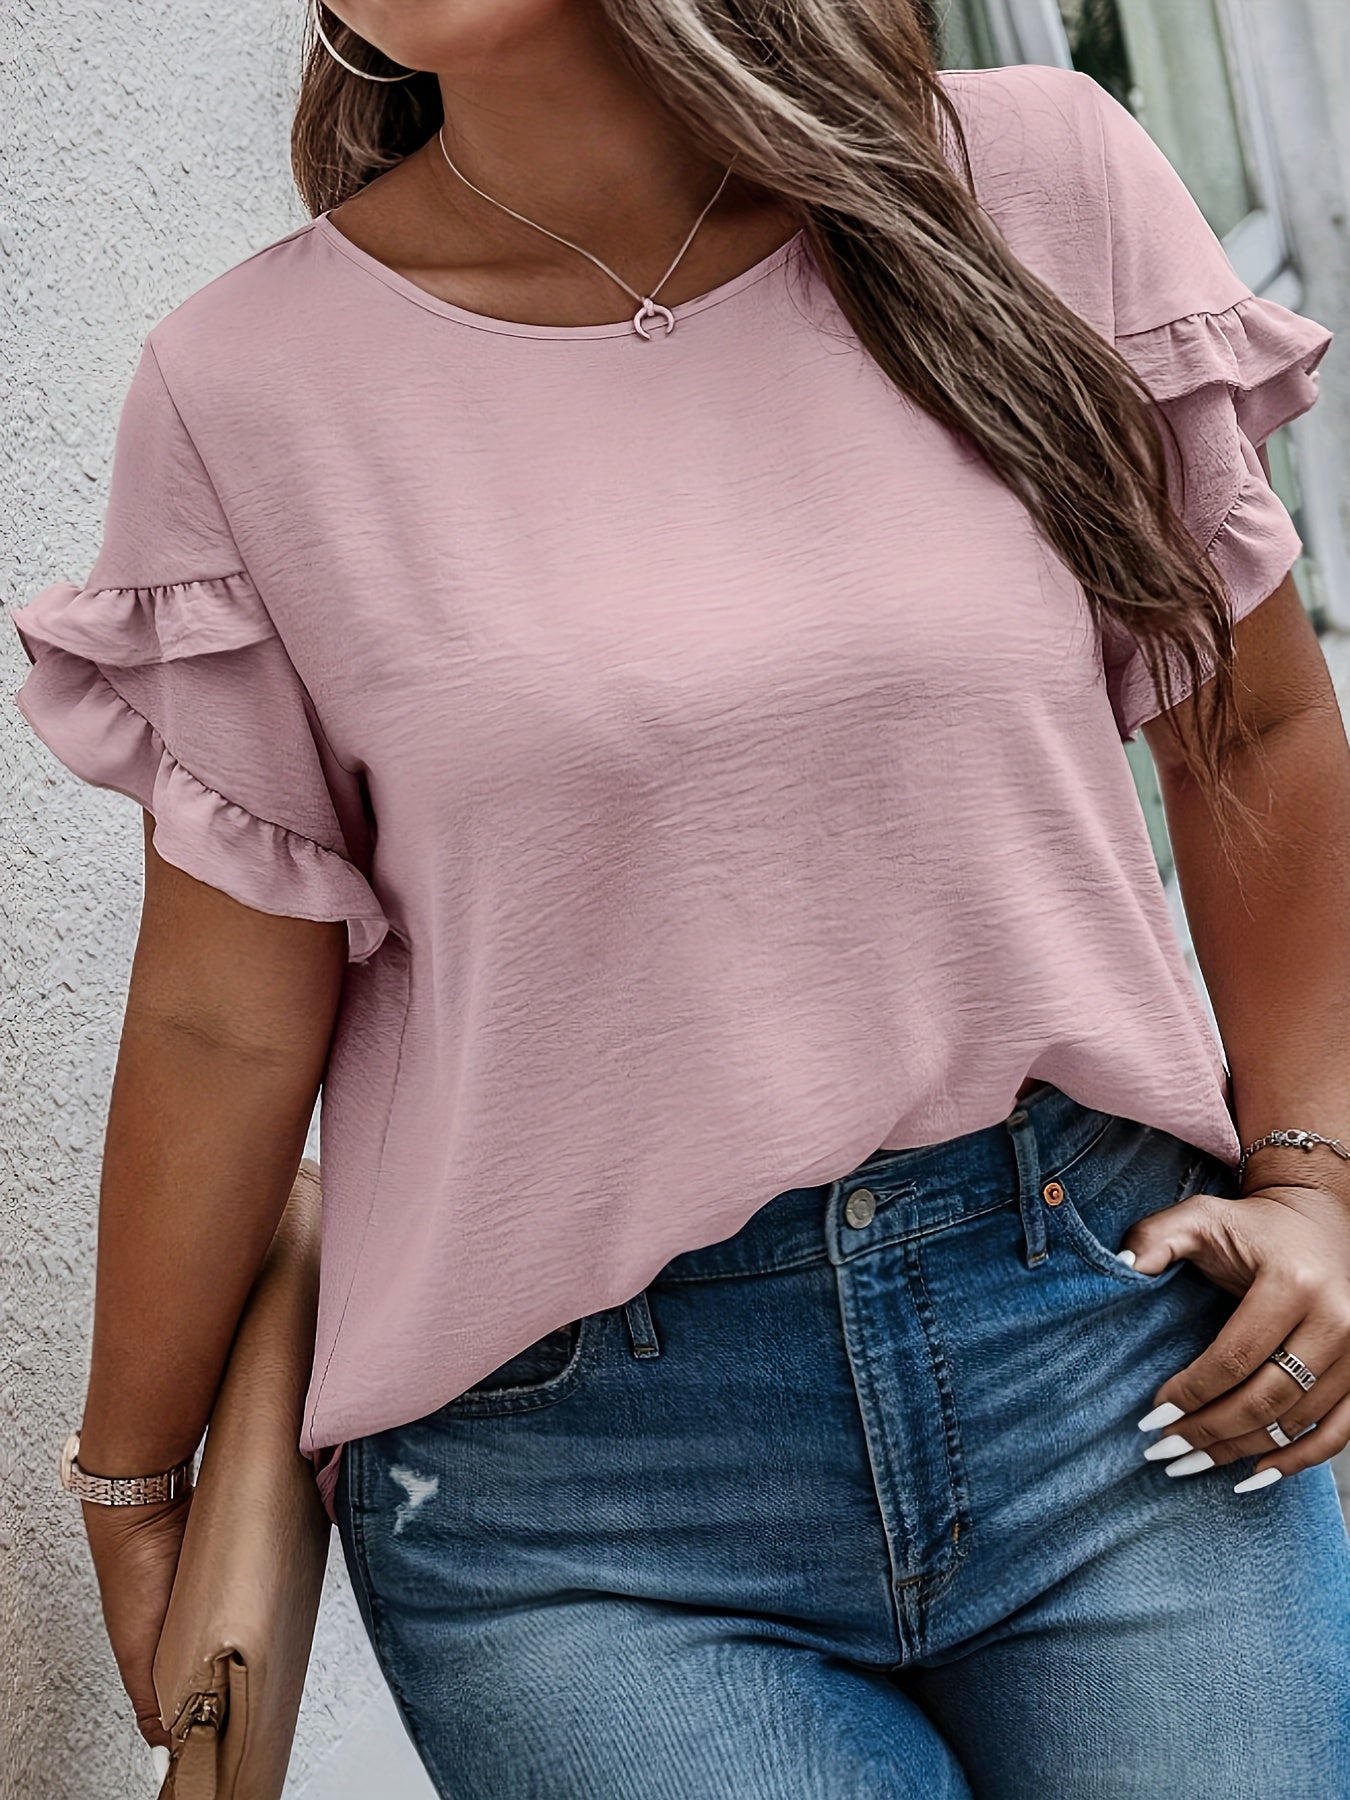 Plus Size Elegant Crew Neck Solid Color Polyester Shirting Blouse - Comfortable Non-Stretch Fabric, Petal Sleeve Design, Perfect for Spring, Summer, Wedding, Holiday, and Vacation - Womens Casual Wear for All Seasons